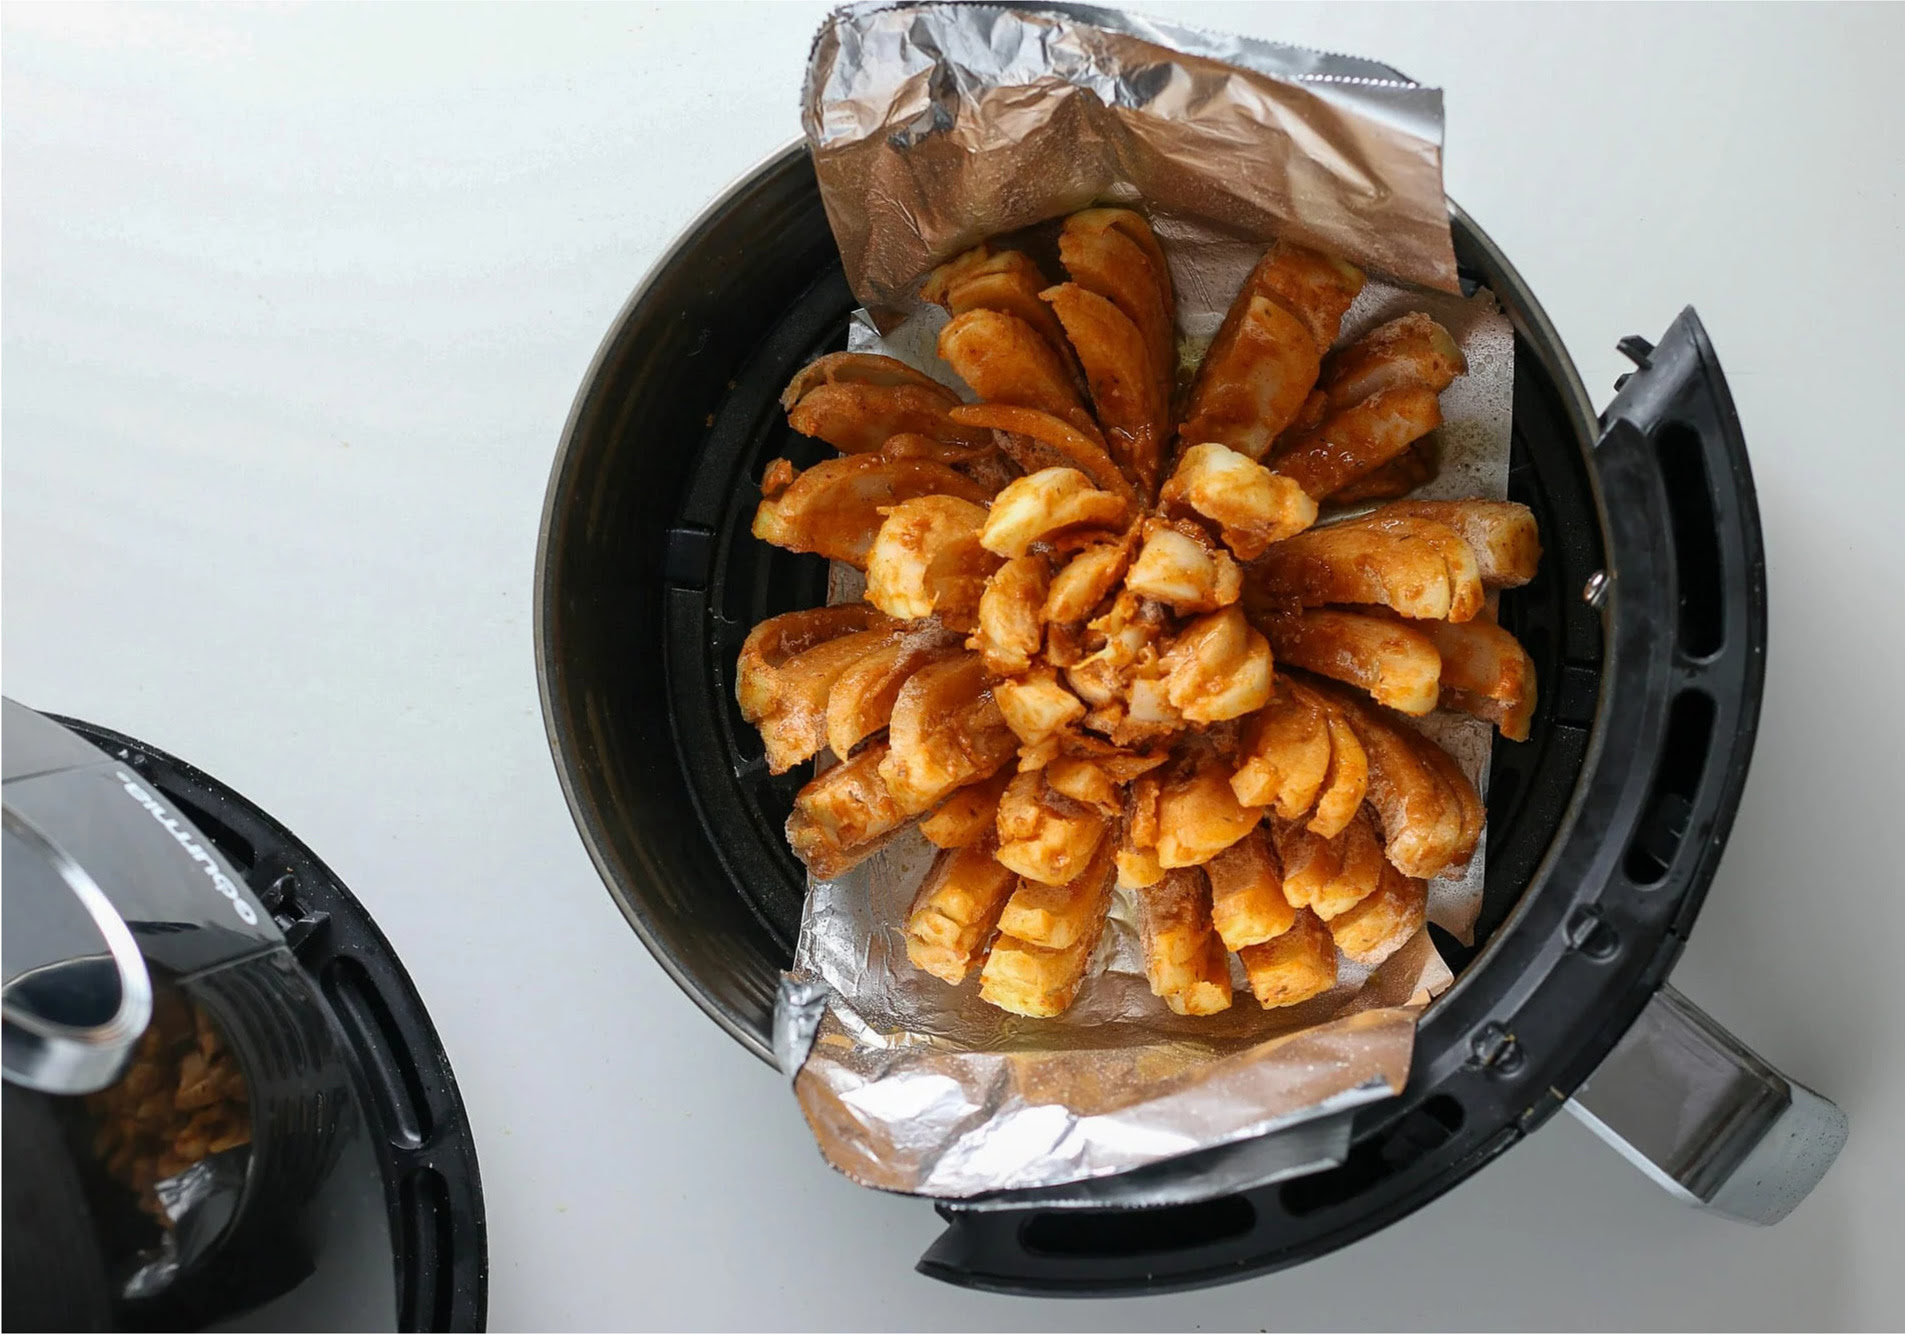 How To Make A Blooming Onion In An Air Fryer